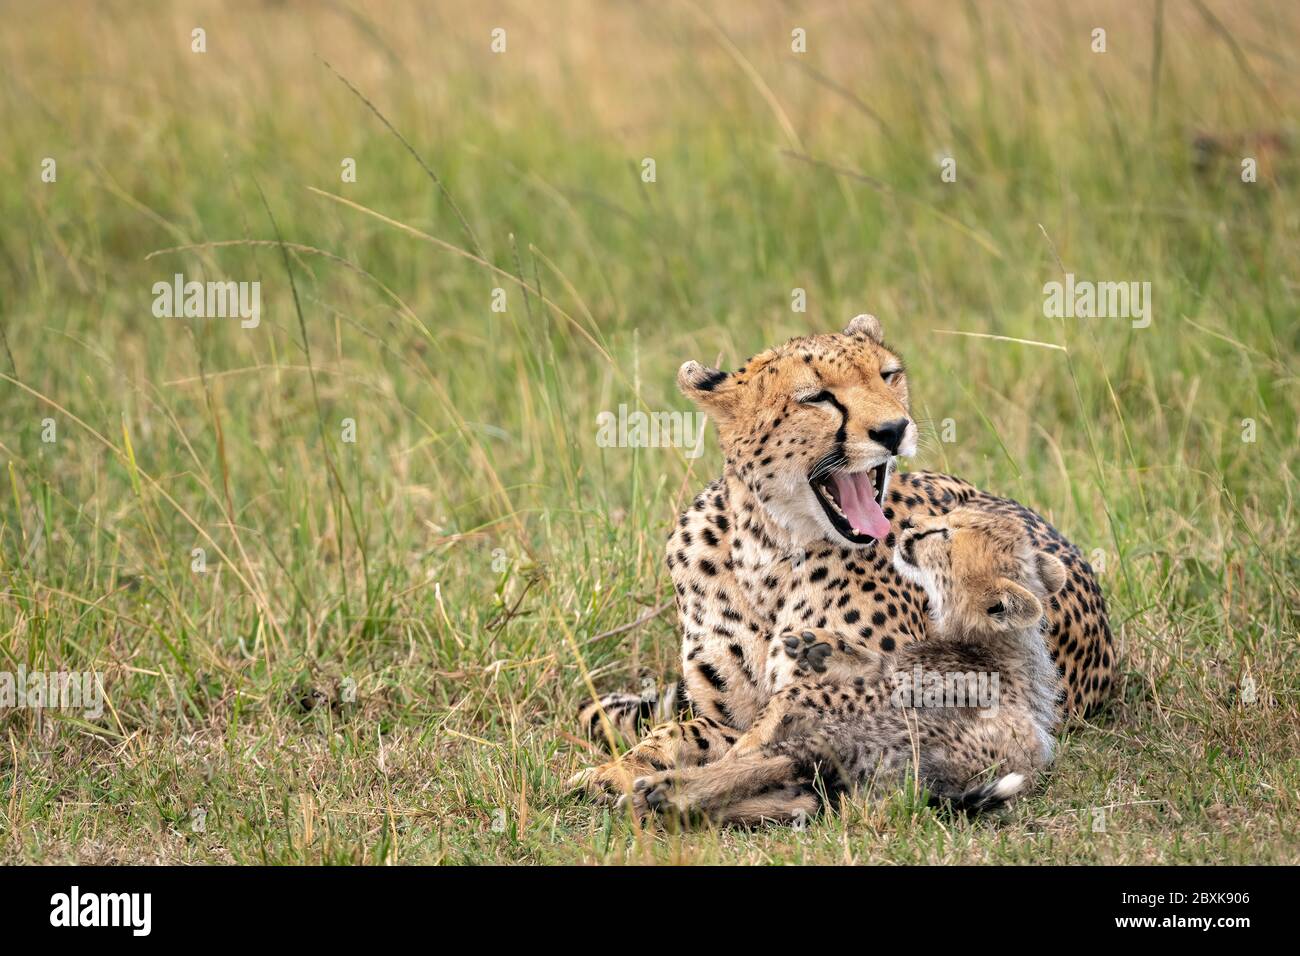 Mother cheetah with mouth open looking at her young cub as he stares up at her intently. Image taken in the Maasai Mara National Reserve, Kenya. Stock Photo